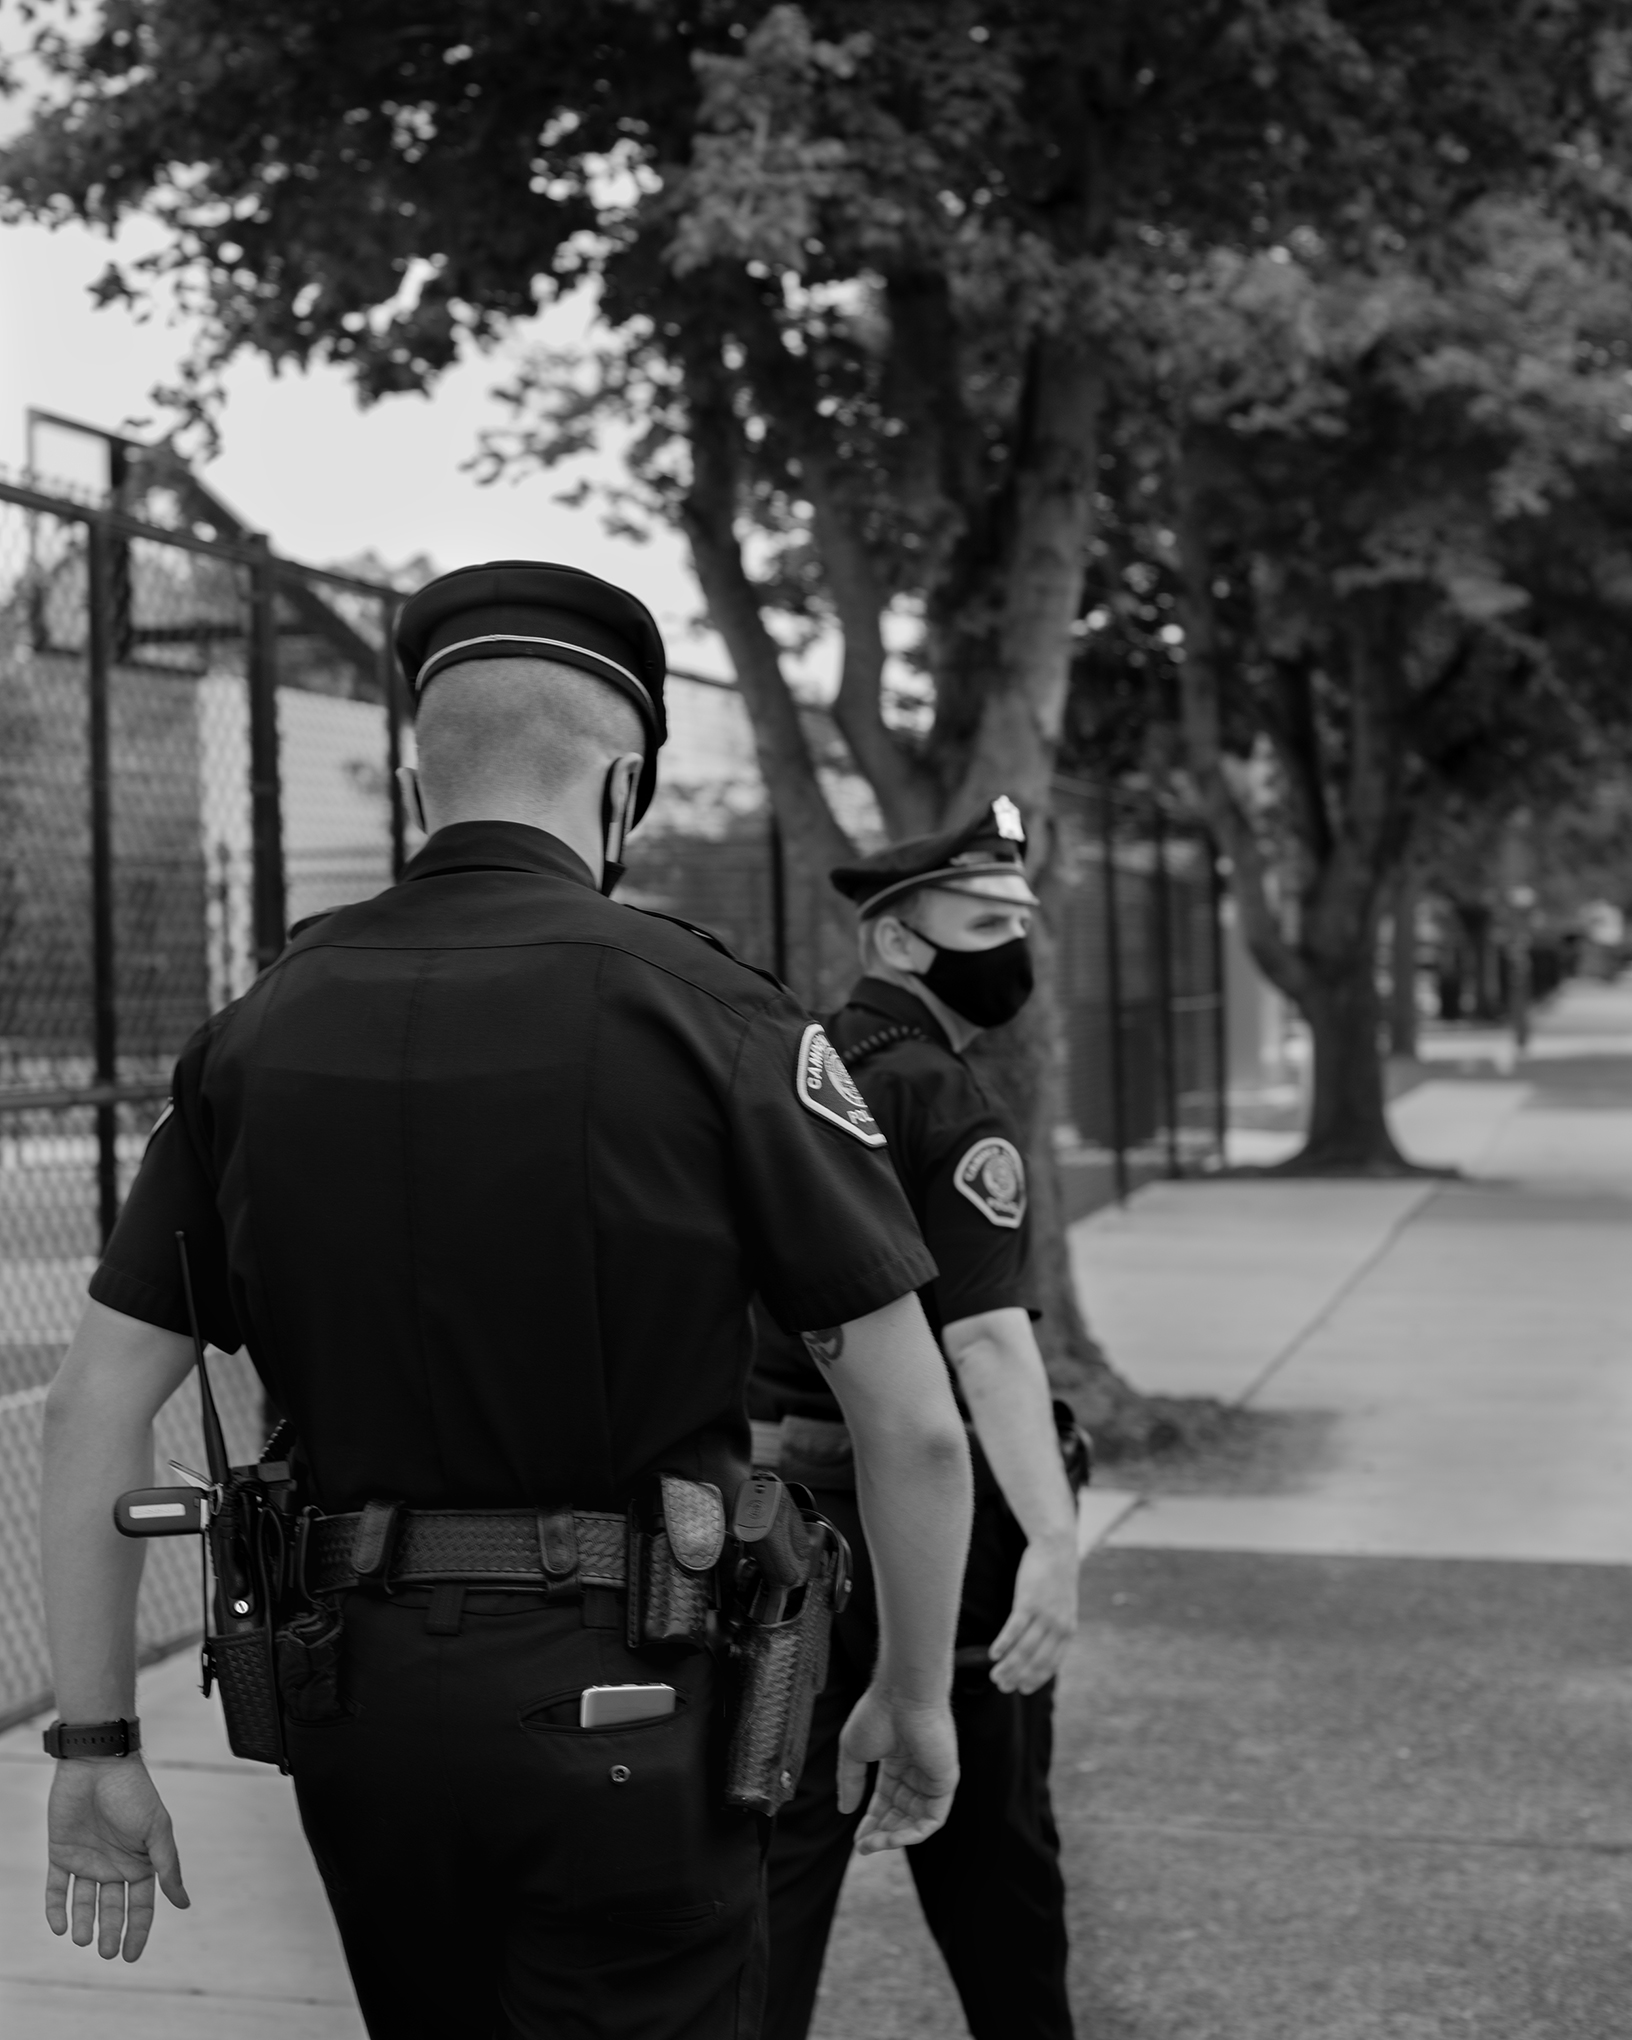 In 2013, when the Camden Police department relaunched under county control, it had two main objectives: reduce the crime rate, and make citizens feel safer. Above, two officers patrol the streets of the city on July 17. (Widline Cadet for TIME)